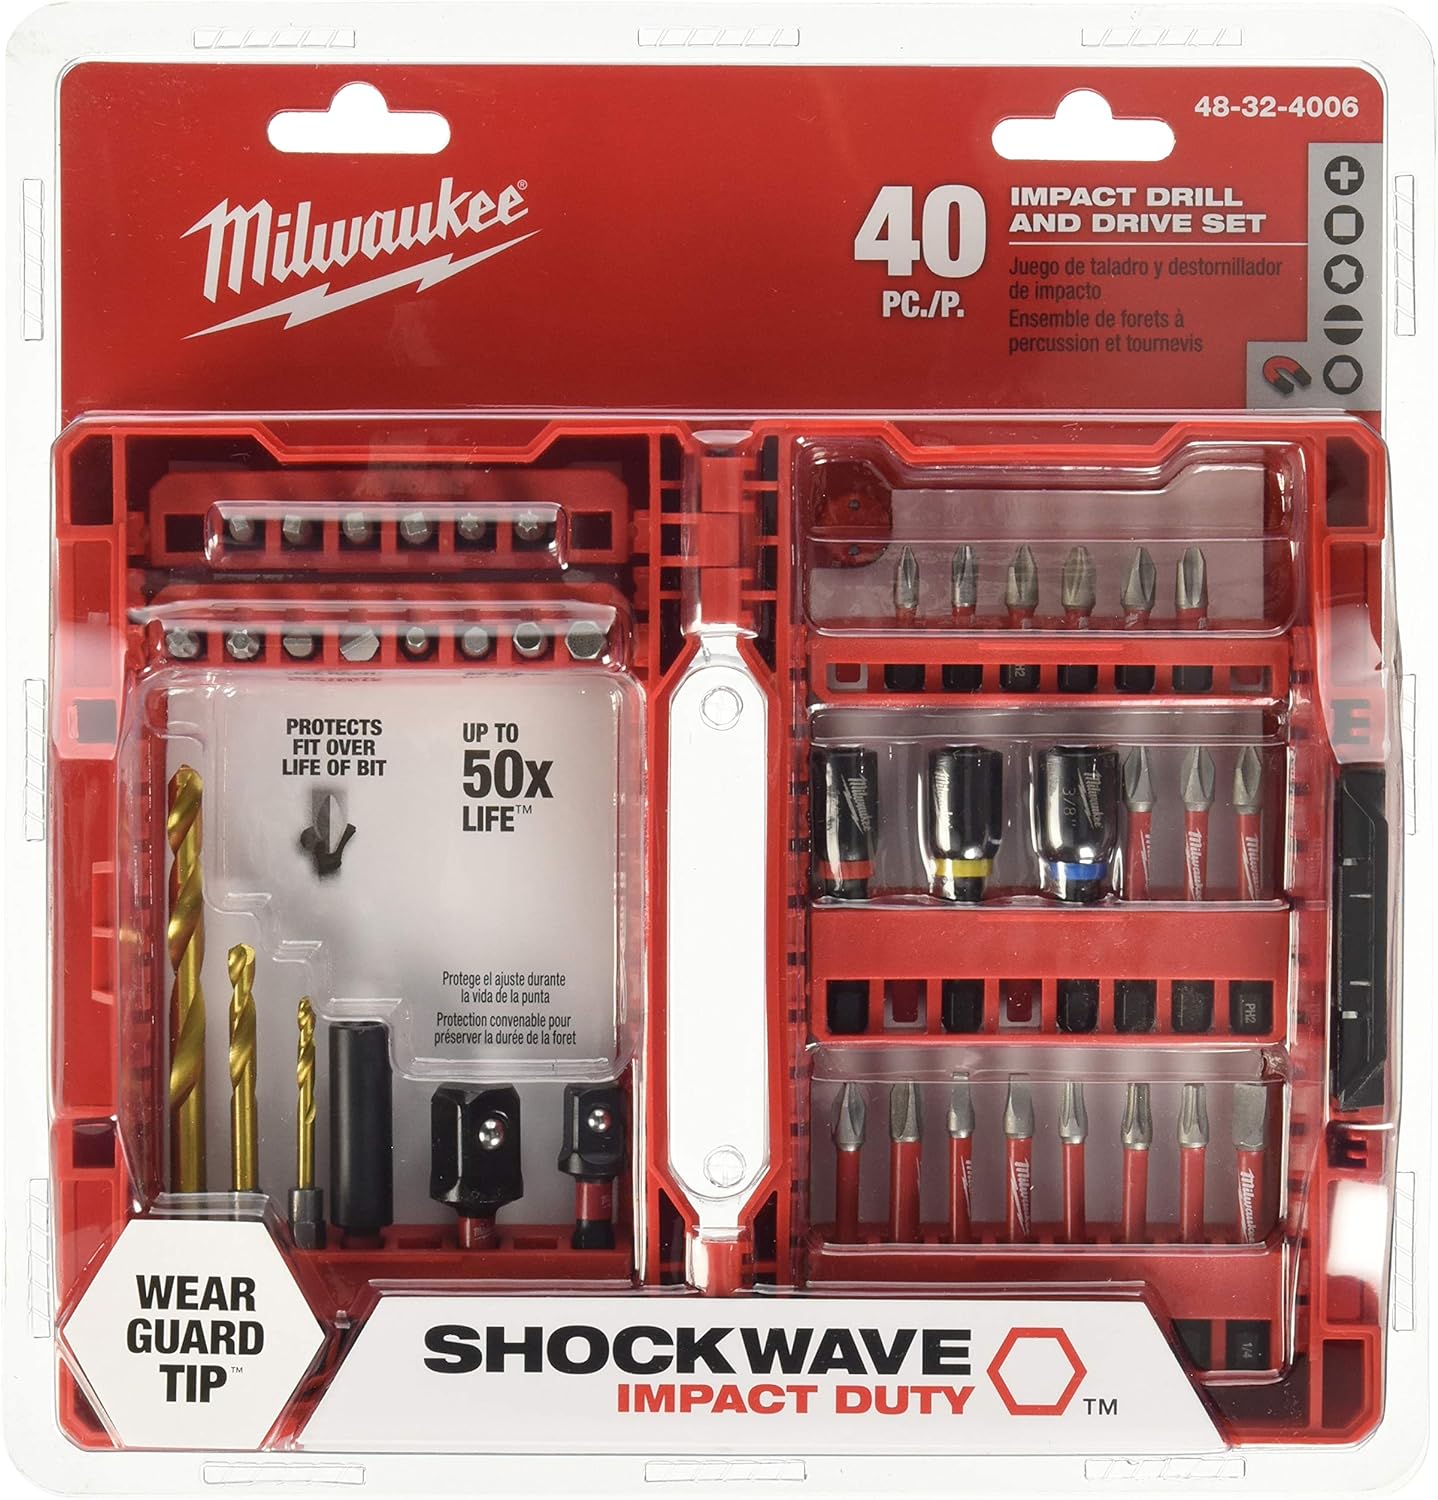 Milwaukee Electric Tool 48-32-4006 Shockwave Impact Hex Drill Bit, Nut Driver - 40 Piece Set